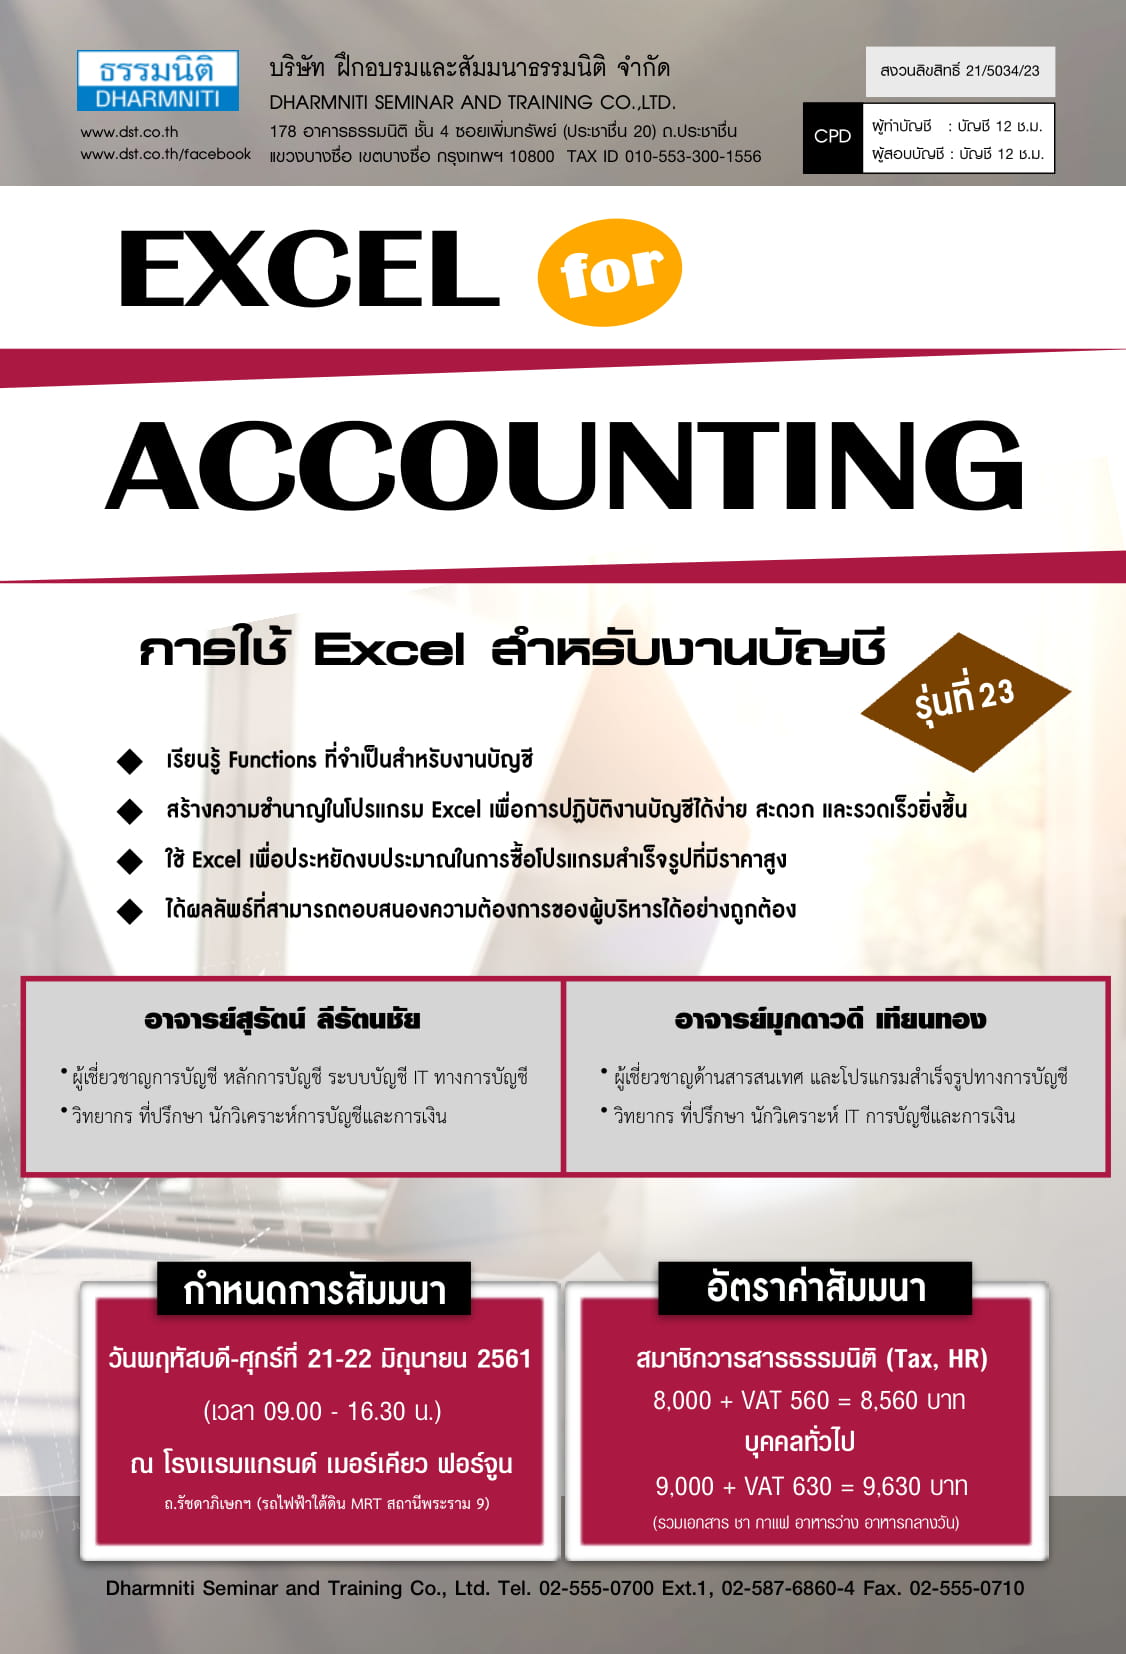 Excel for Accounting (การใช้ Excel สำหรับงานบัญชี) รุ่นที่ 23